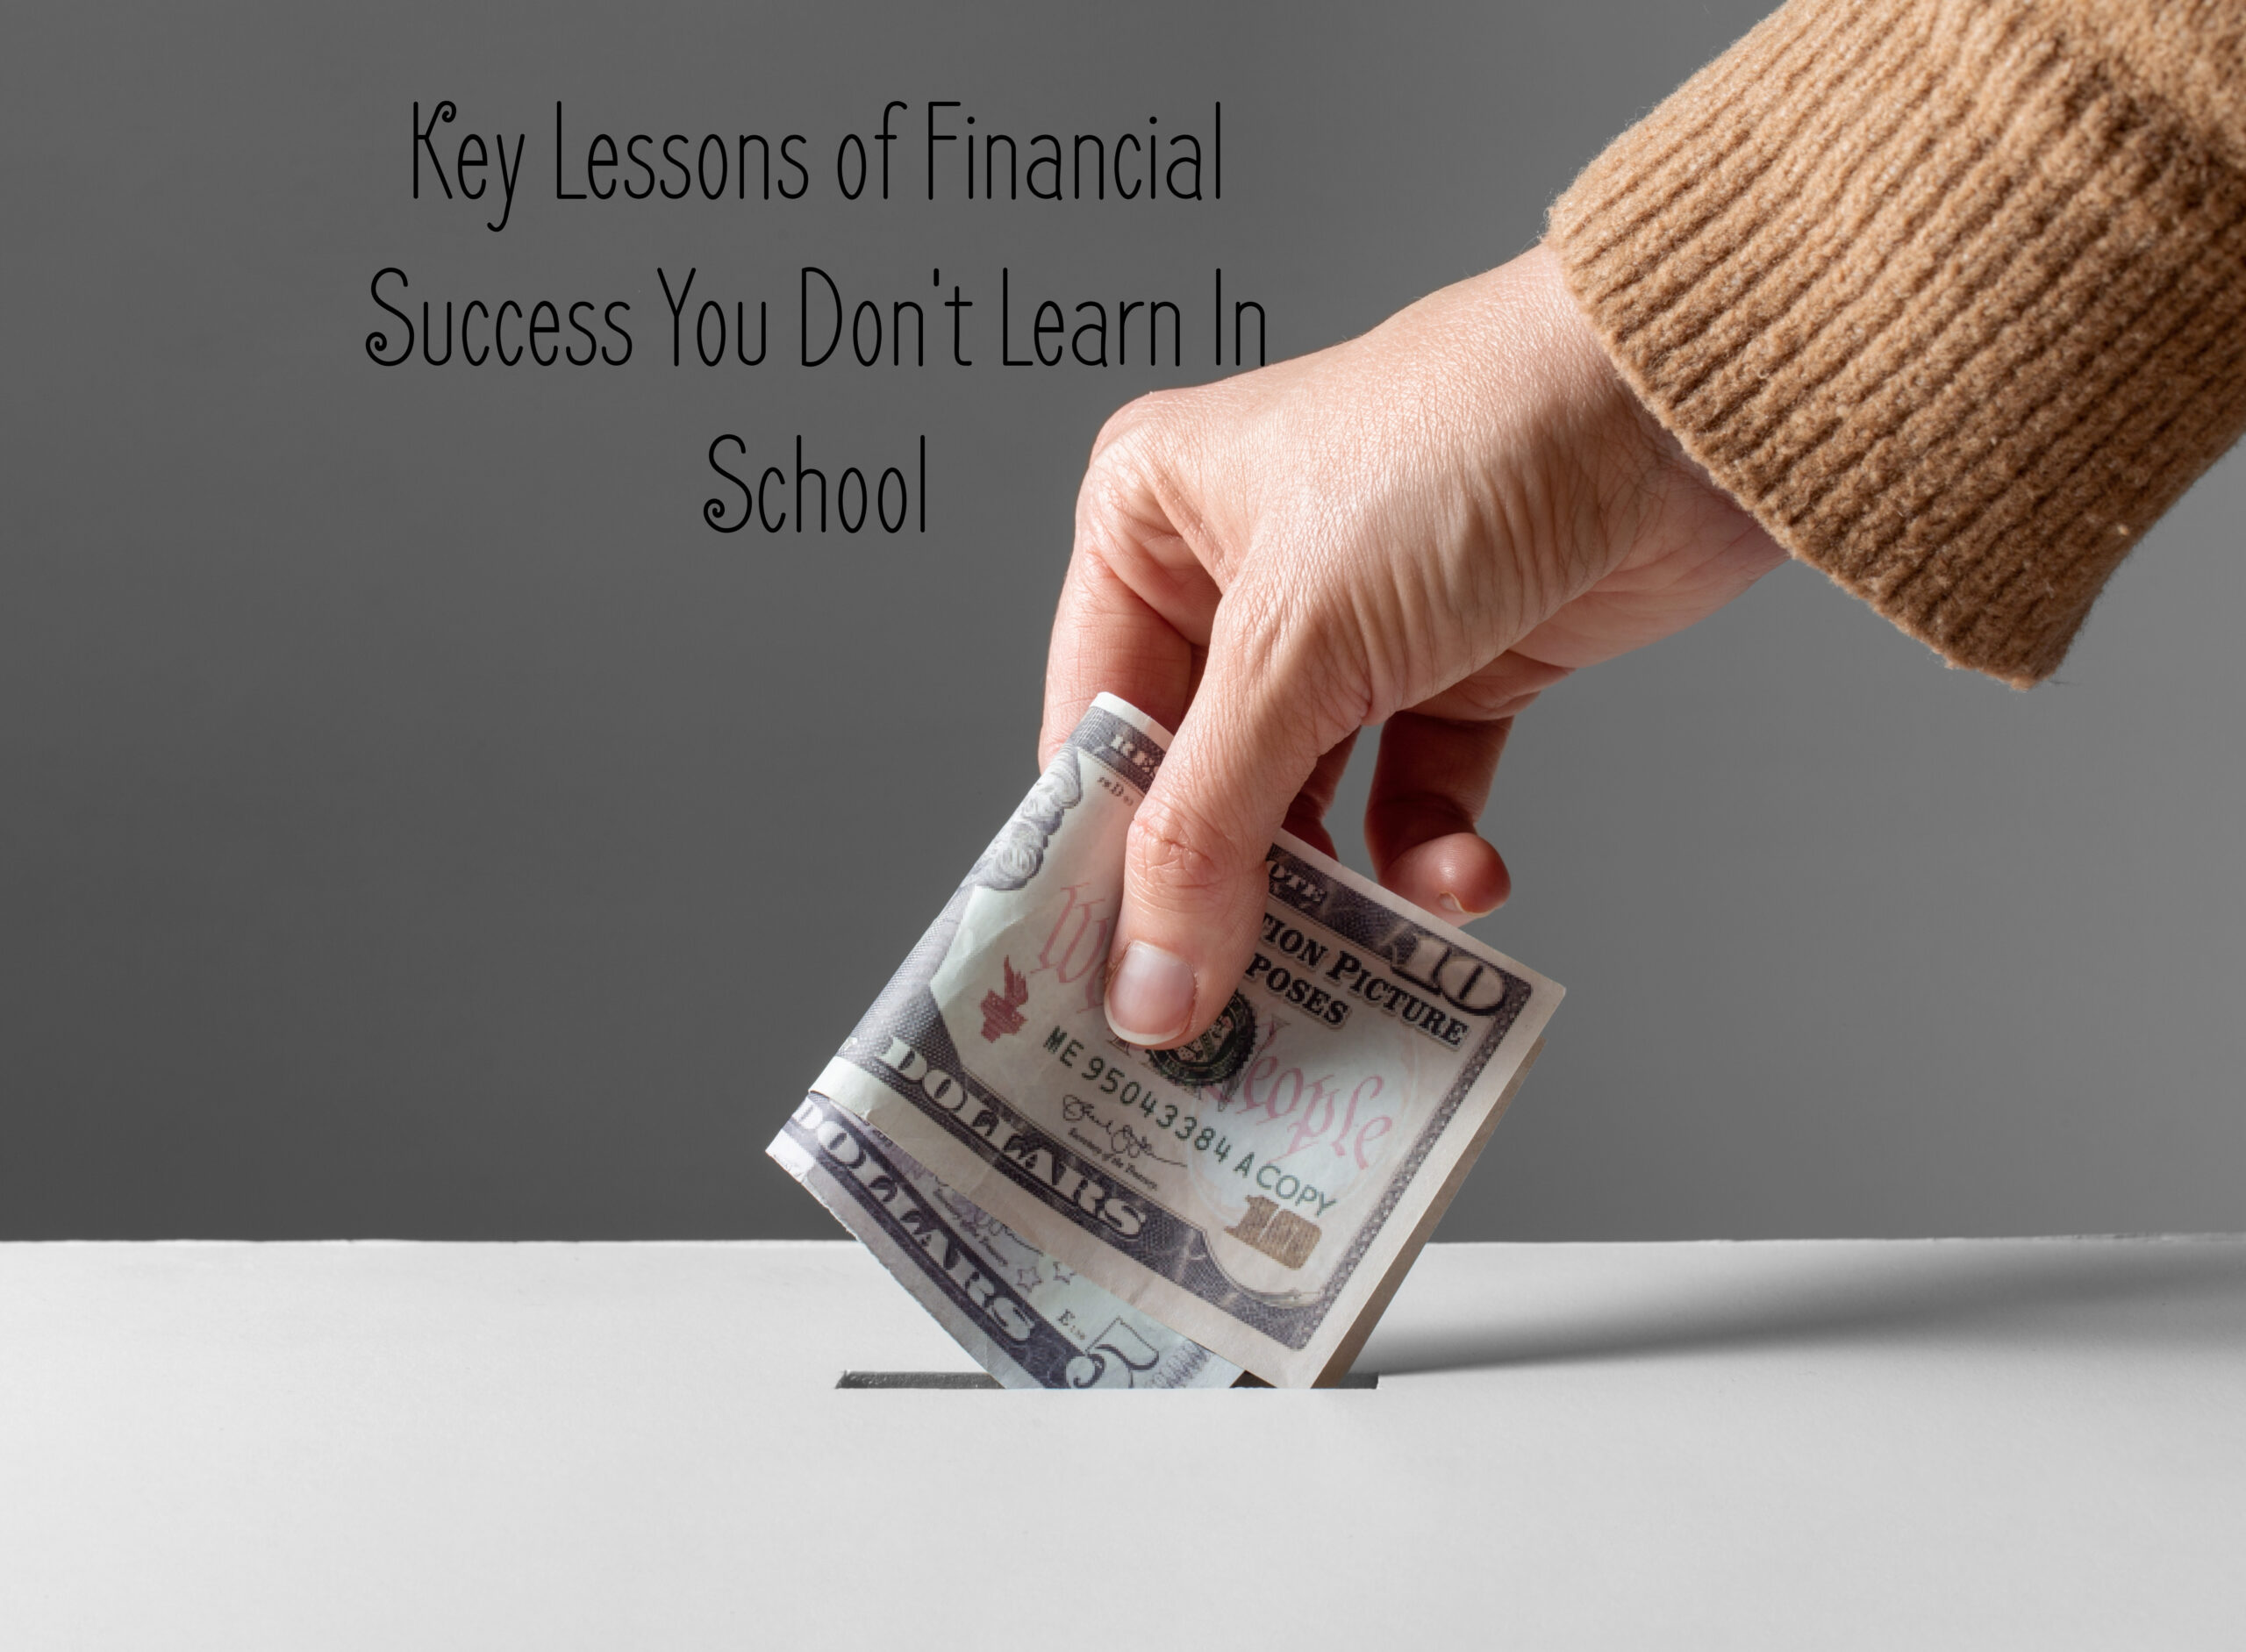 Key Lessons of Financial Success You Don’t Learn in School